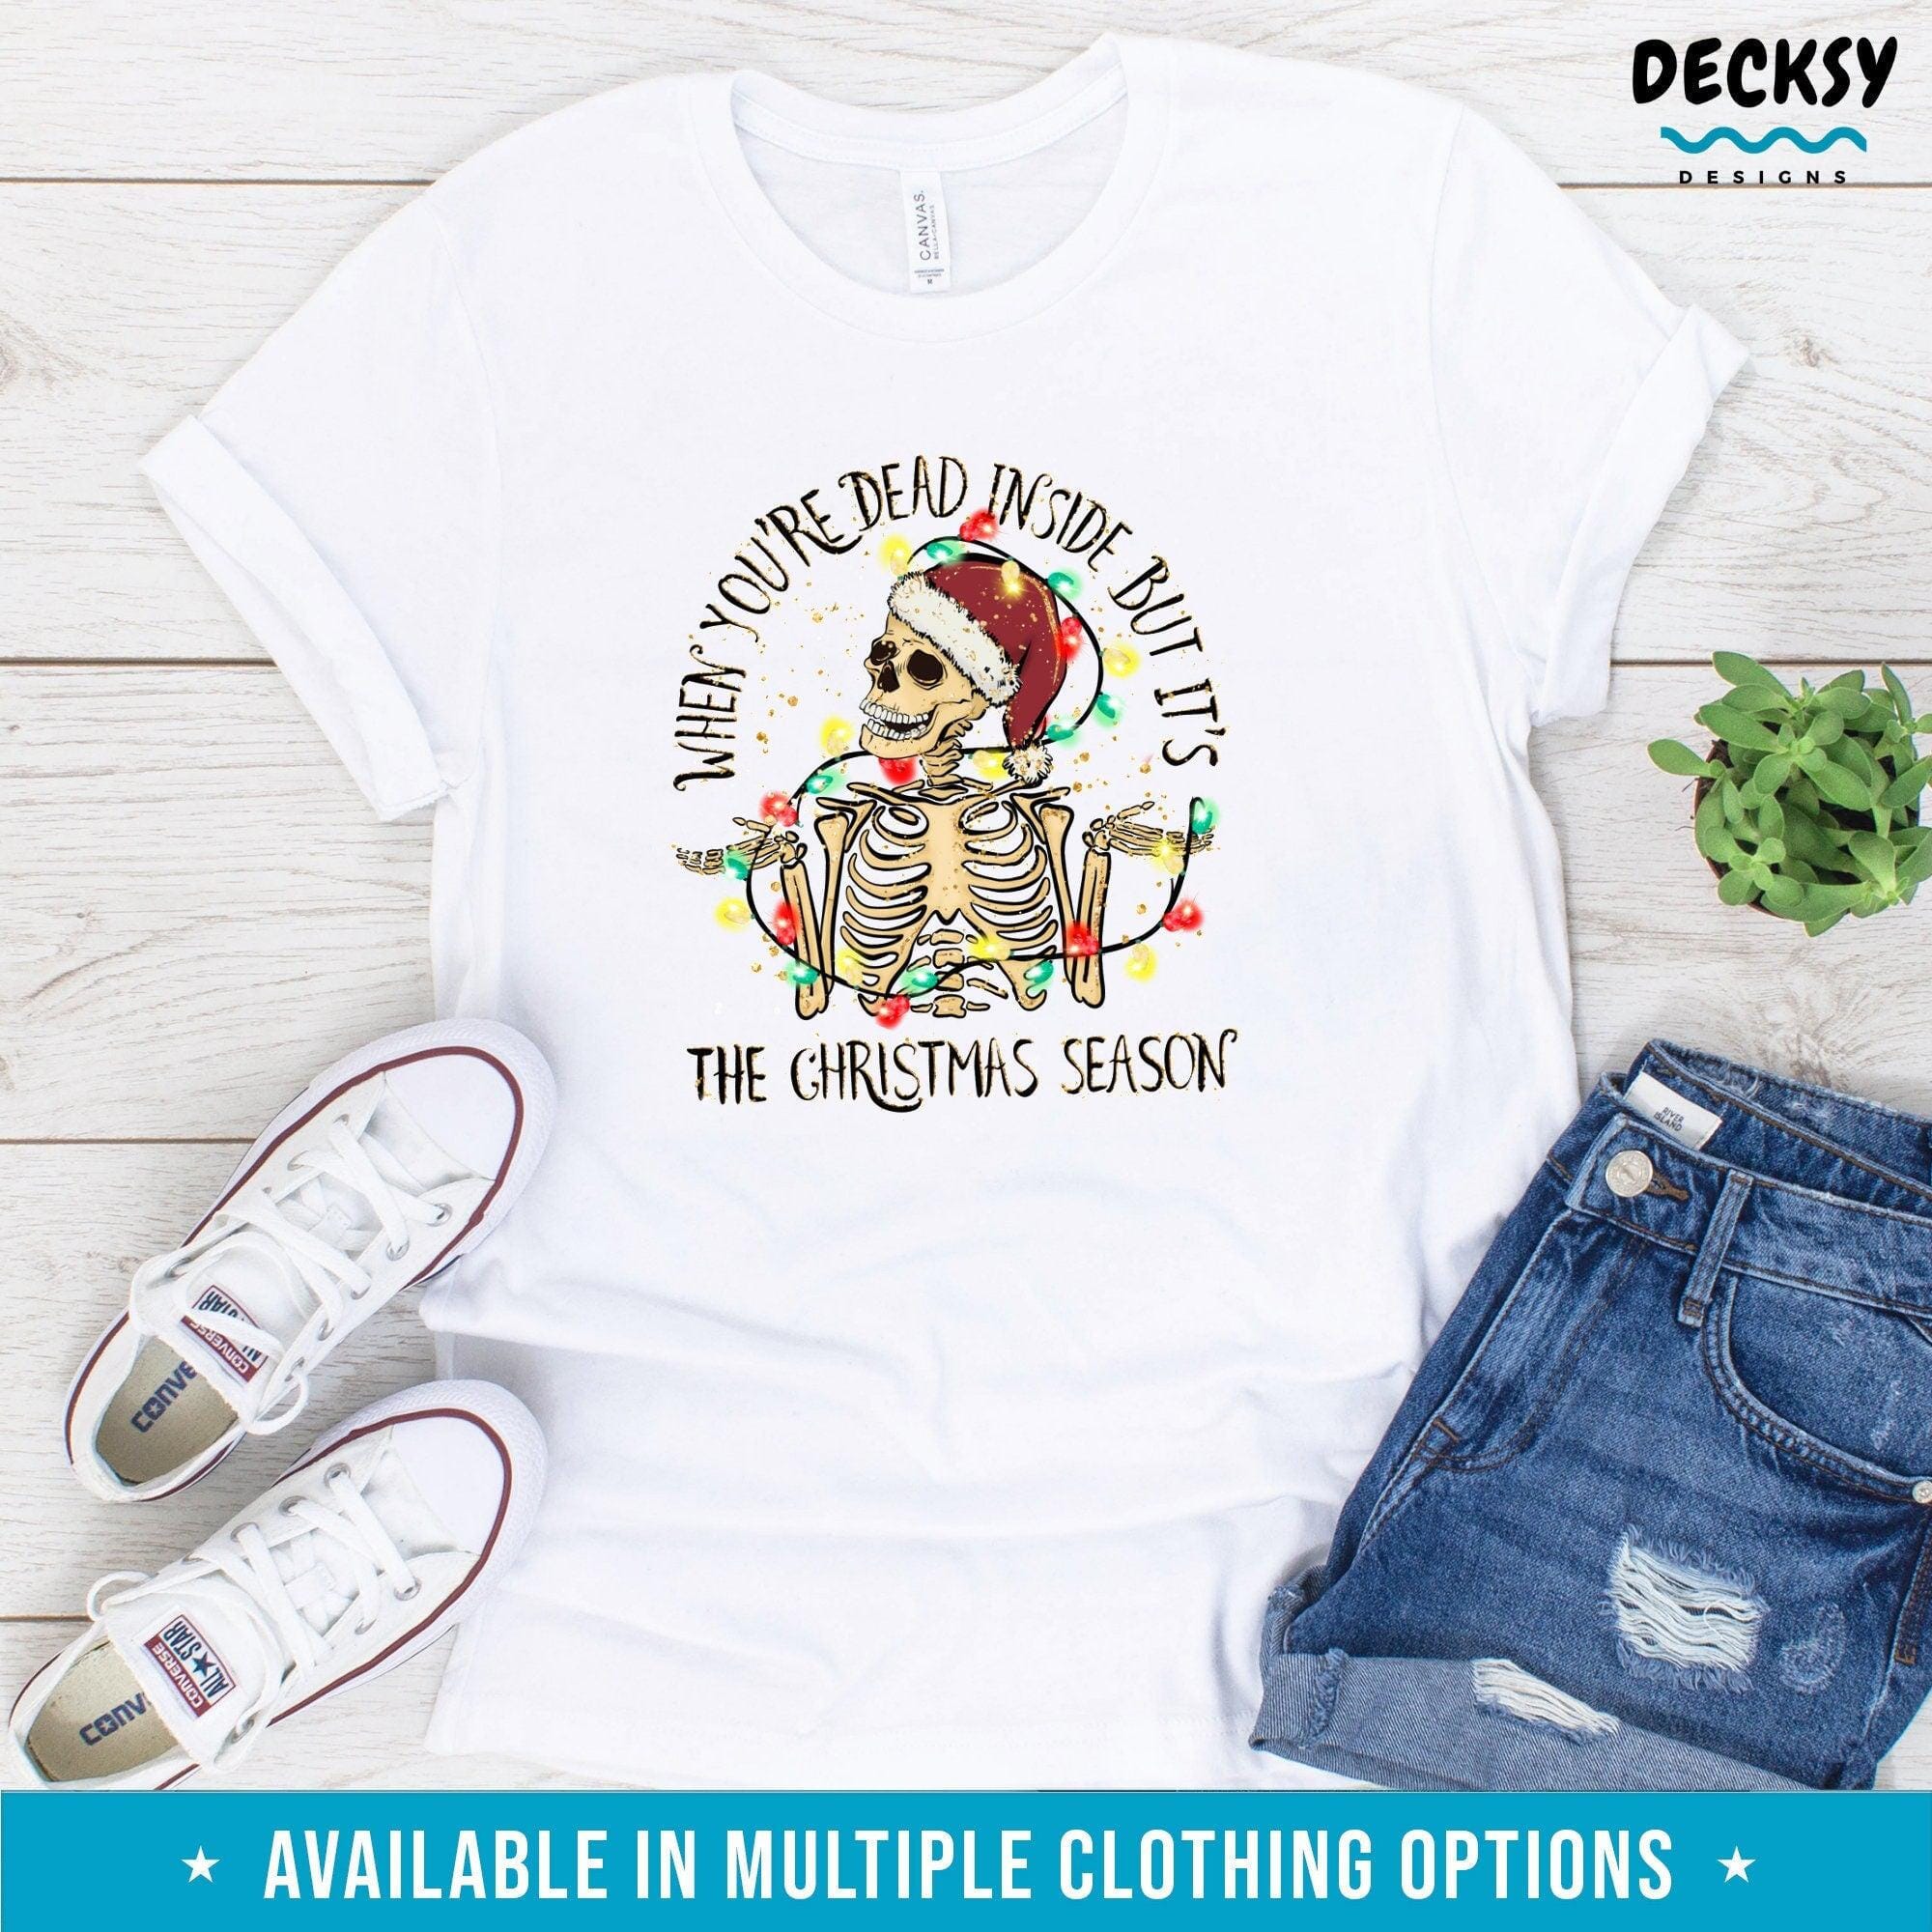 Christmas Shirt, Skeleton Christmas Gift-Clothing:Gender-Neutral Adult Clothing:Tops & Tees:T-shirts:Graphic Tees-DecksyDesigns